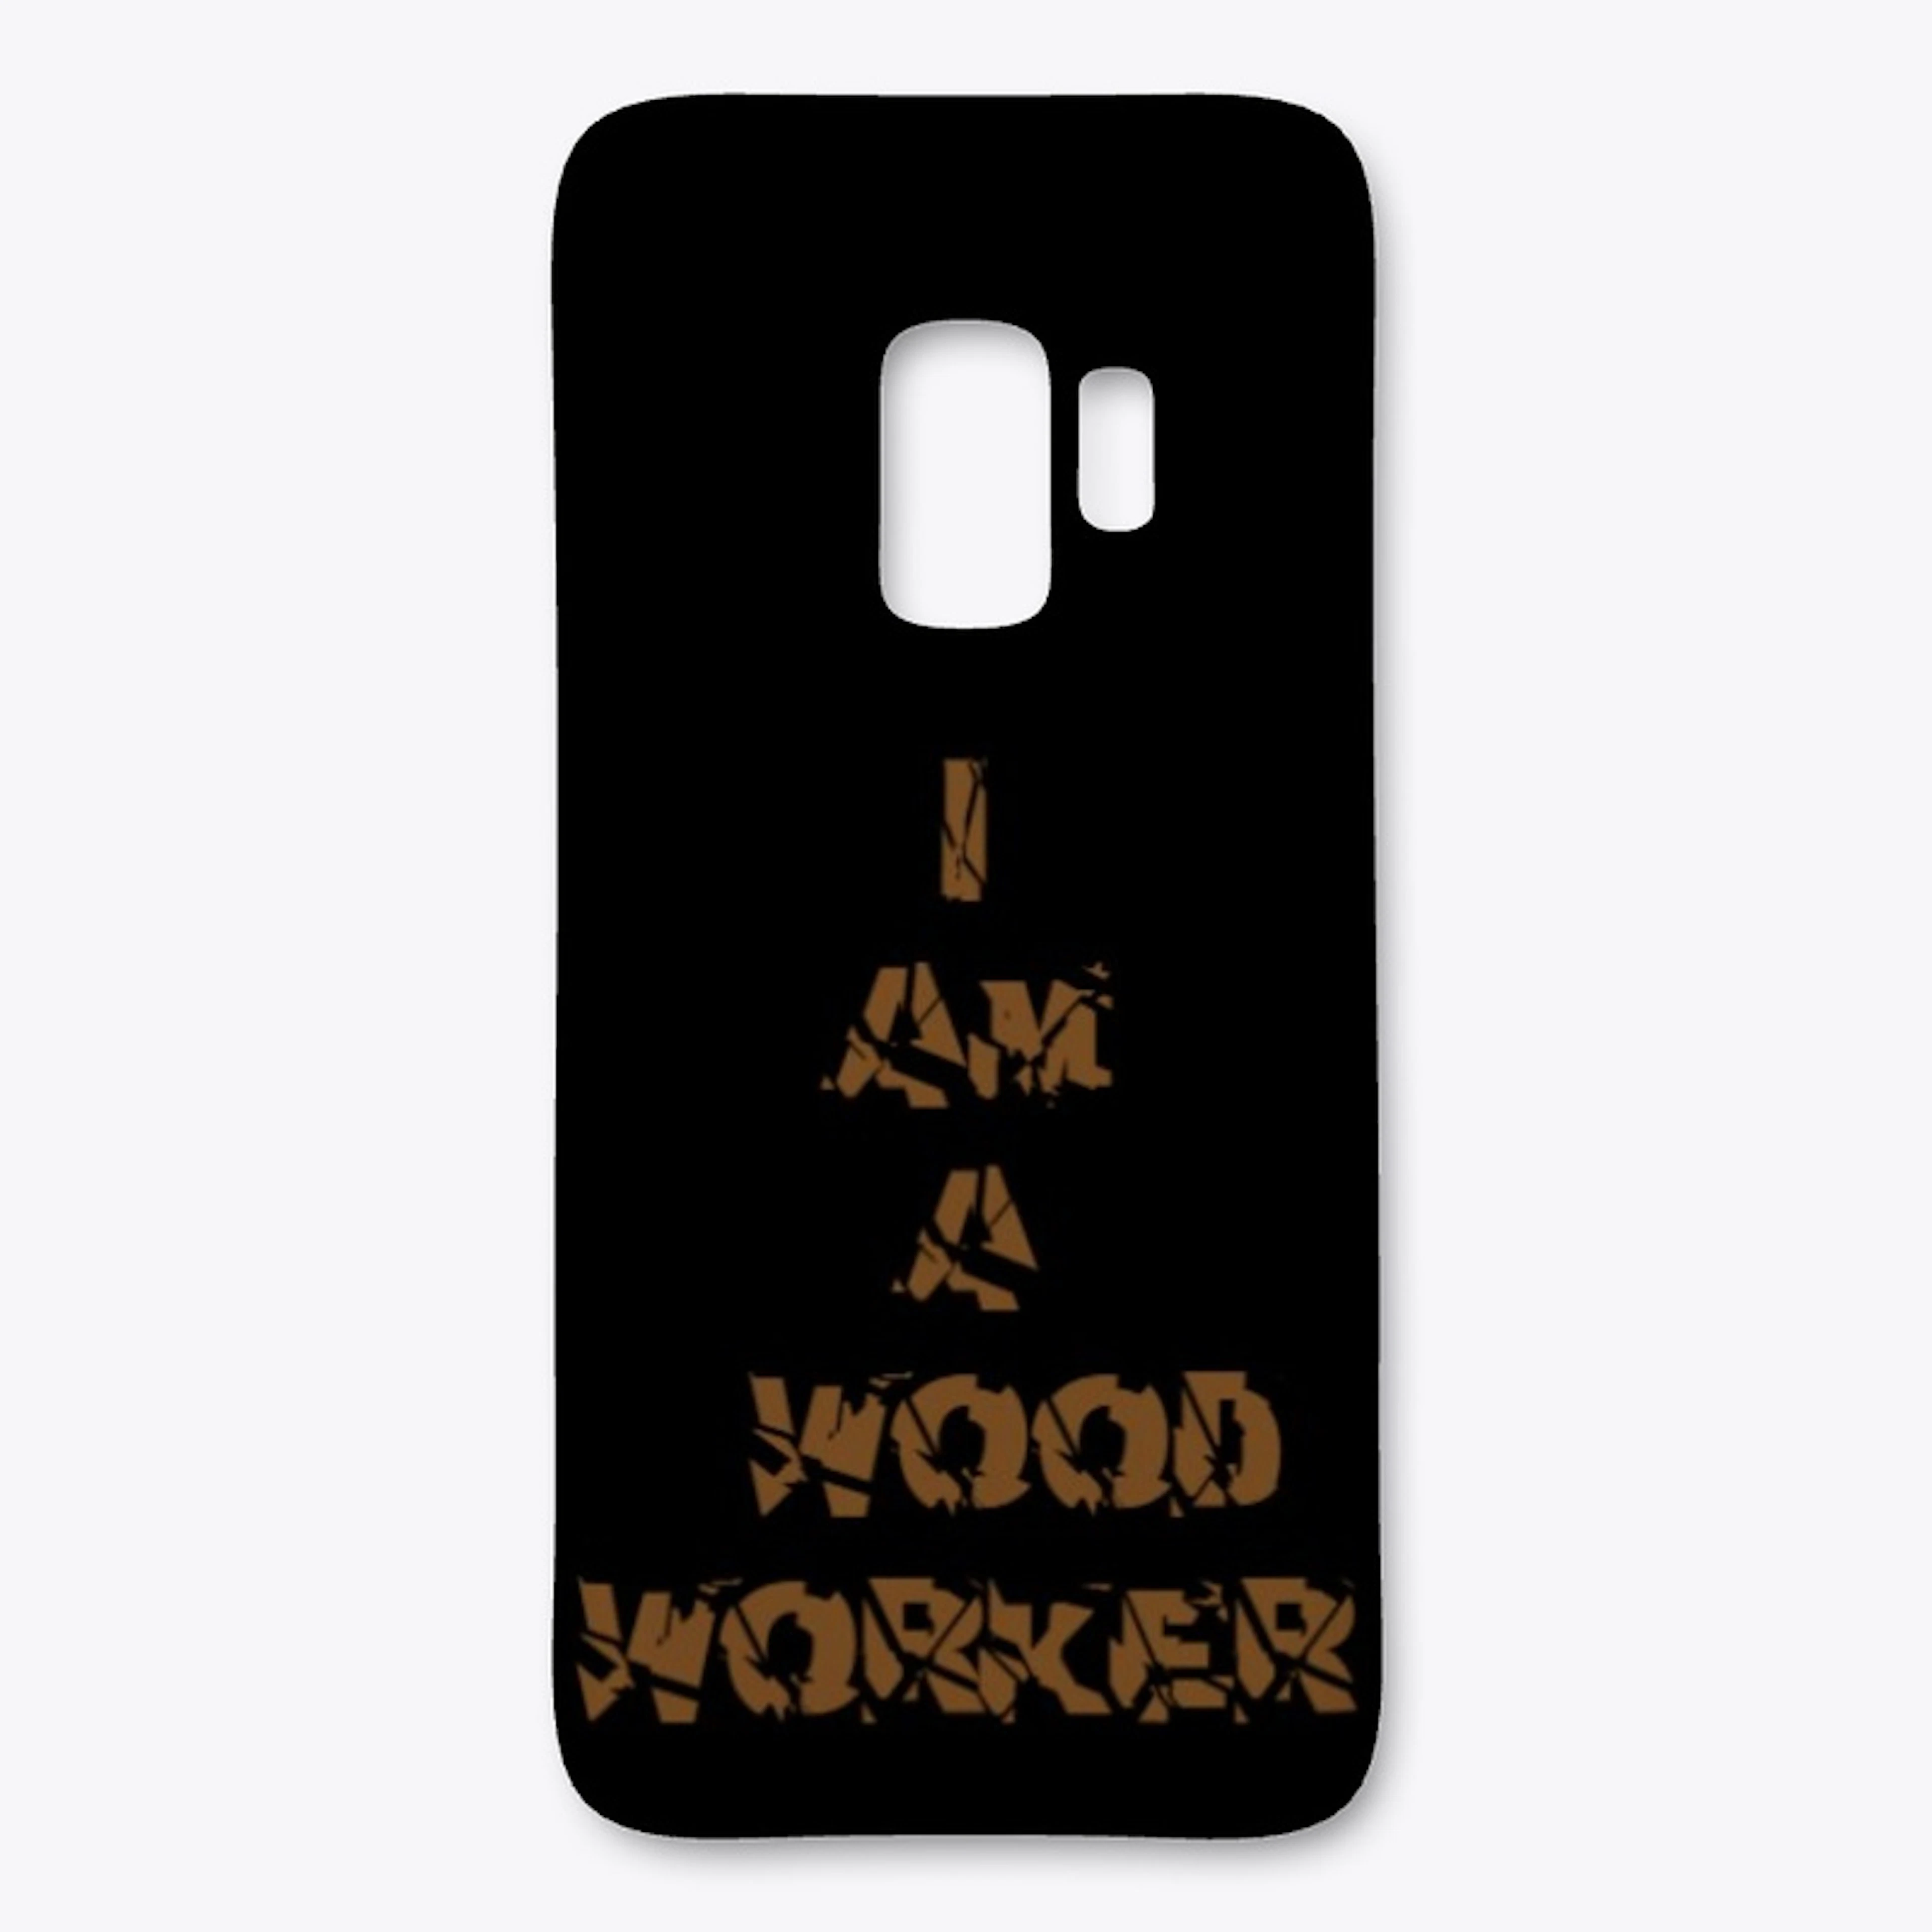 I AM A WOODWORKER